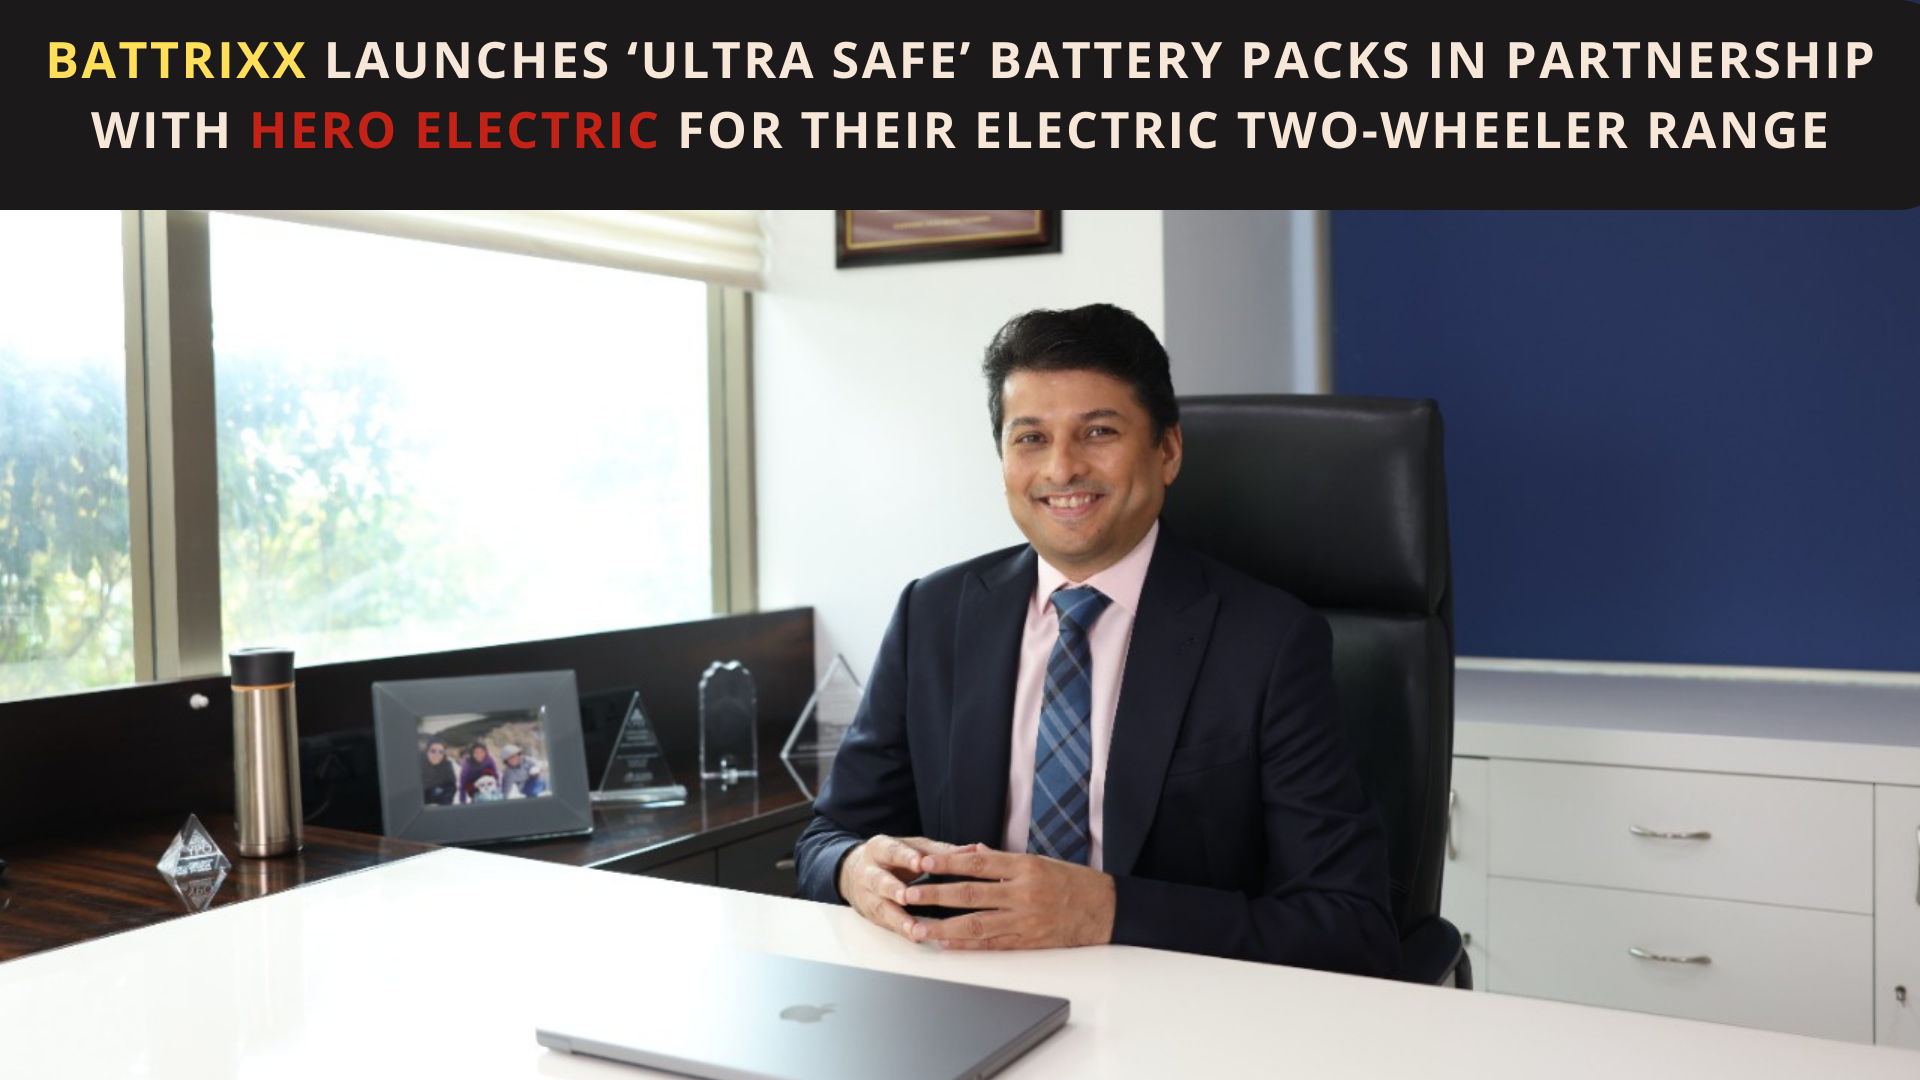 Battrixx launches ‘Ultra Safe’ battery packs in partnership with Hero Electric for their E2W range